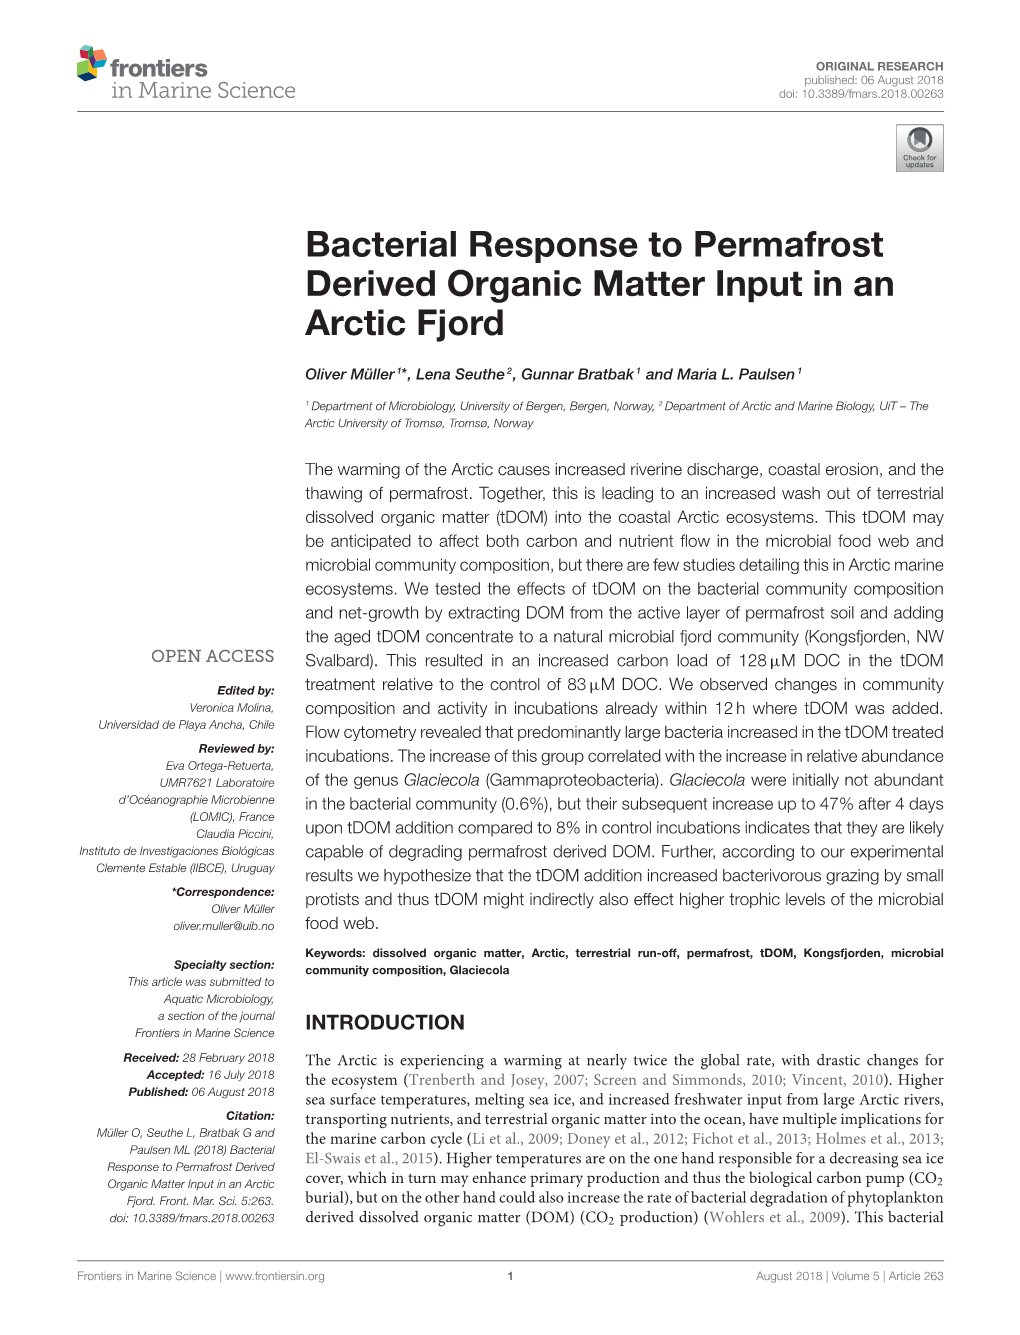 Bacterial Response to Permafrost Derived Organic Matter Input in an Arctic Fjord